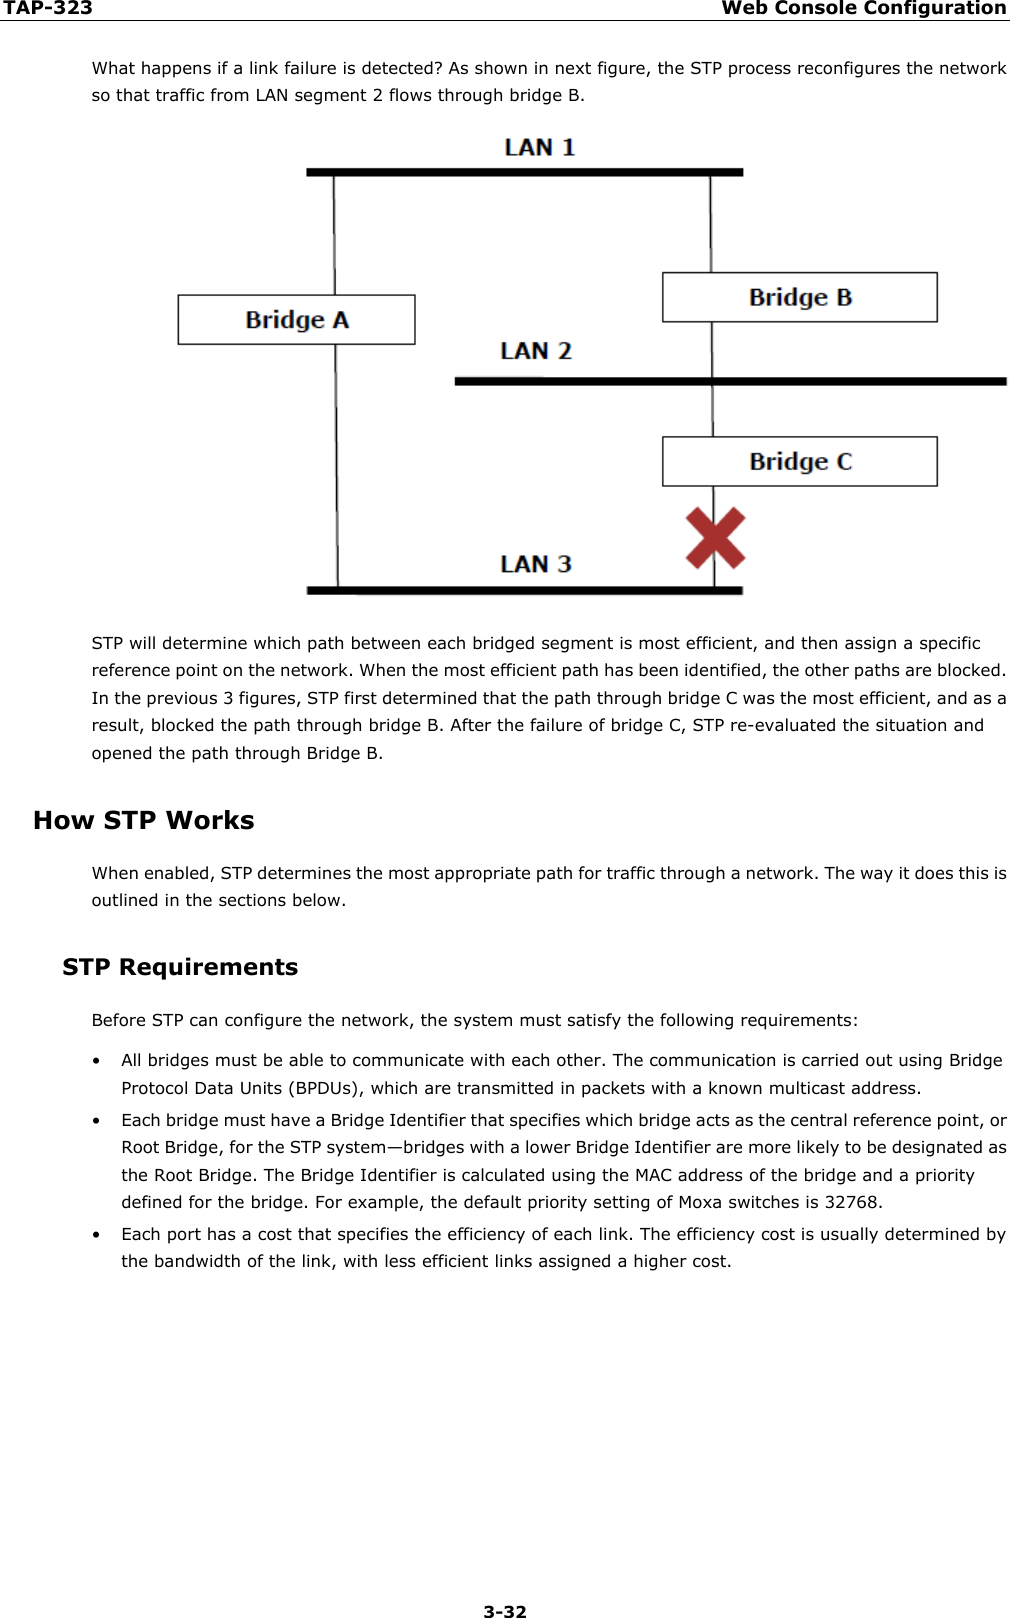 TAP-323 Web Console Configuration  3-32 What happens if a link failure is detected? As shown in next figure, the STP process reconfigures the network so that traffic from LAN segment 2 flows through bridge B.  STP will determine which path between each bridged segment is most efficient, and then assign a specific reference point on the network. When the most efficient path has been identified, the other paths are blocked. In the previous 3 figures, STP first determined that the path through bridge C was the most efficient, and as a result, blocked the path through bridge B. After the failure of bridge C, STP re-evaluated the situation and opened the path through Bridge B. How STP Works When enabled, STP determines the most appropriate path for traffic through a network. The way it does this is outlined in the sections below. STP Requirements Before STP can configure the network, the system must satisfy the following requirements: • All bridges must be able to communicate with each other. The communication is carried out using Bridge Protocol Data Units (BPDUs), which are transmitted in packets with a known multicast address. • Each bridge must have a Bridge Identifier that specifies which bridge acts as the central reference point, or Root Bridge, for the STP system—bridges with a lower Bridge Identifier are more likely to be designated as the Root Bridge. The Bridge Identifier is calculated using the MAC address of the bridge and a priority defined for the bridge. For example, the default priority setting of Moxa switches is 32768. • Each port has a cost that specifies the efficiency of each link. The efficiency cost is usually determined by the bandwidth of the link, with less efficient links assigned a higher cost.       